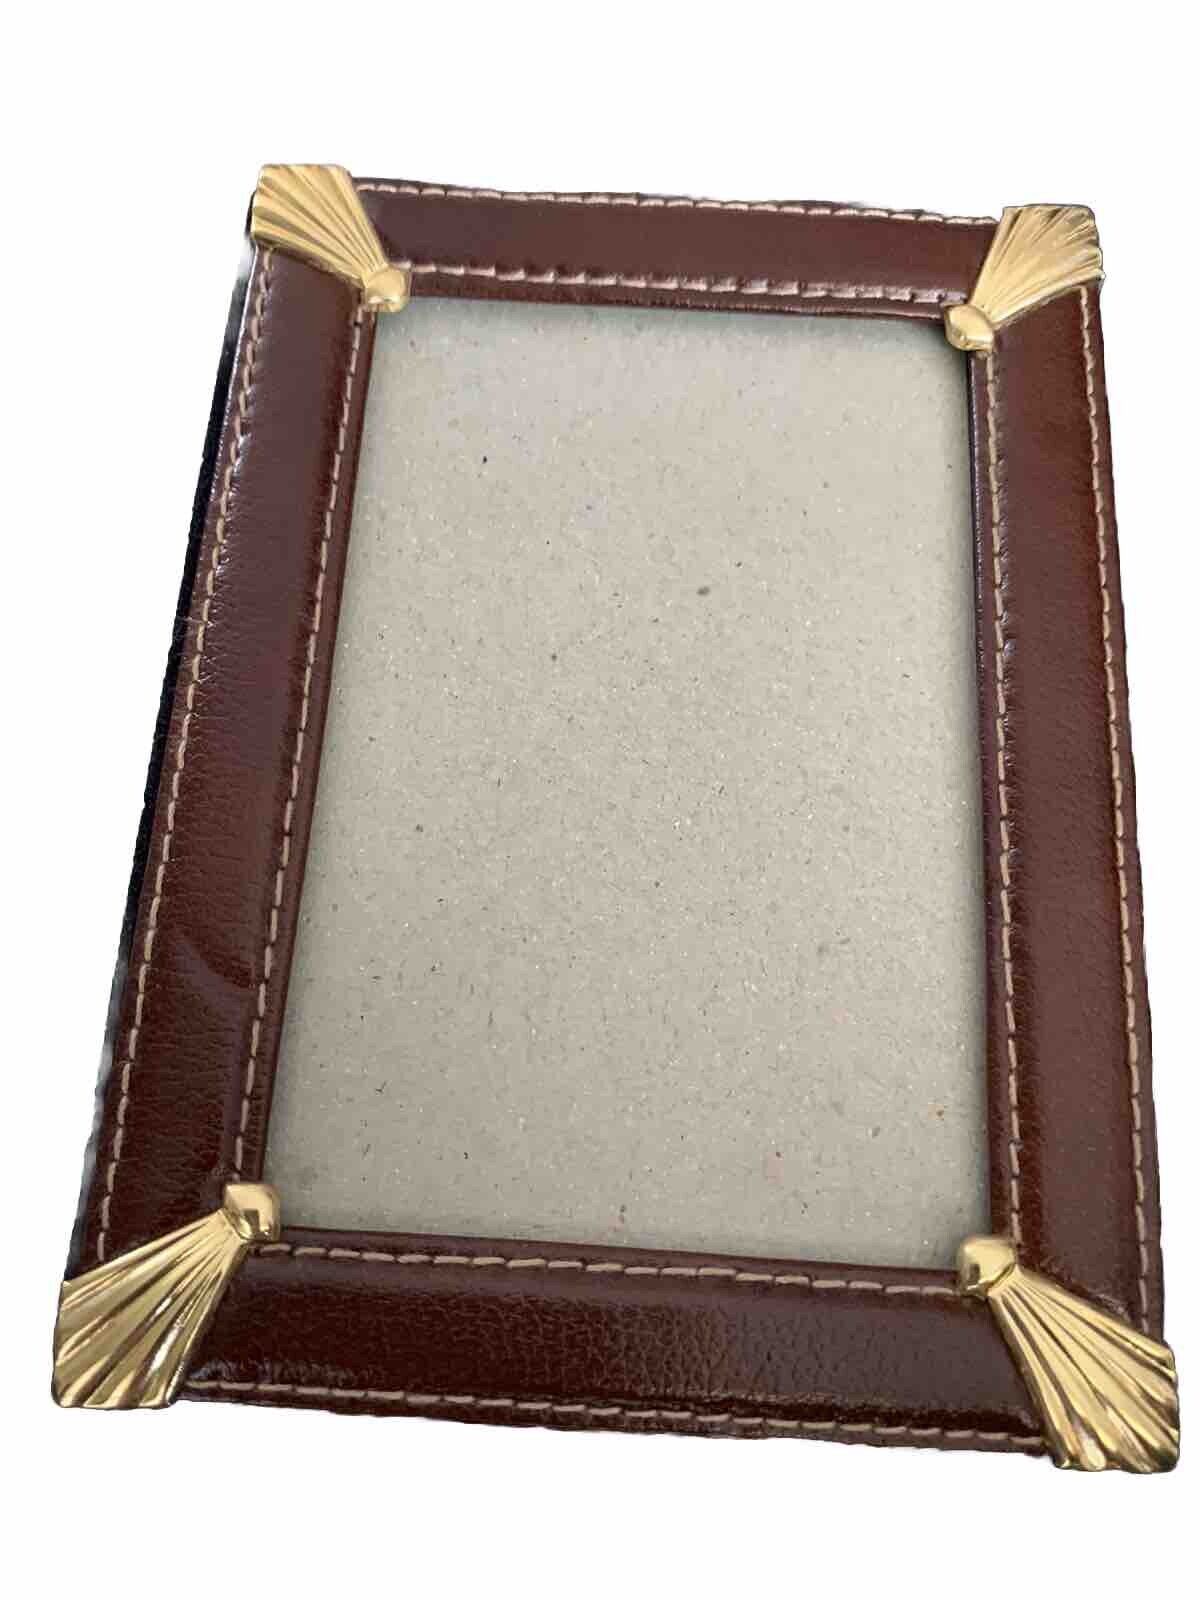 Elysees Small Leather Picture Frame 3.5”x 5”